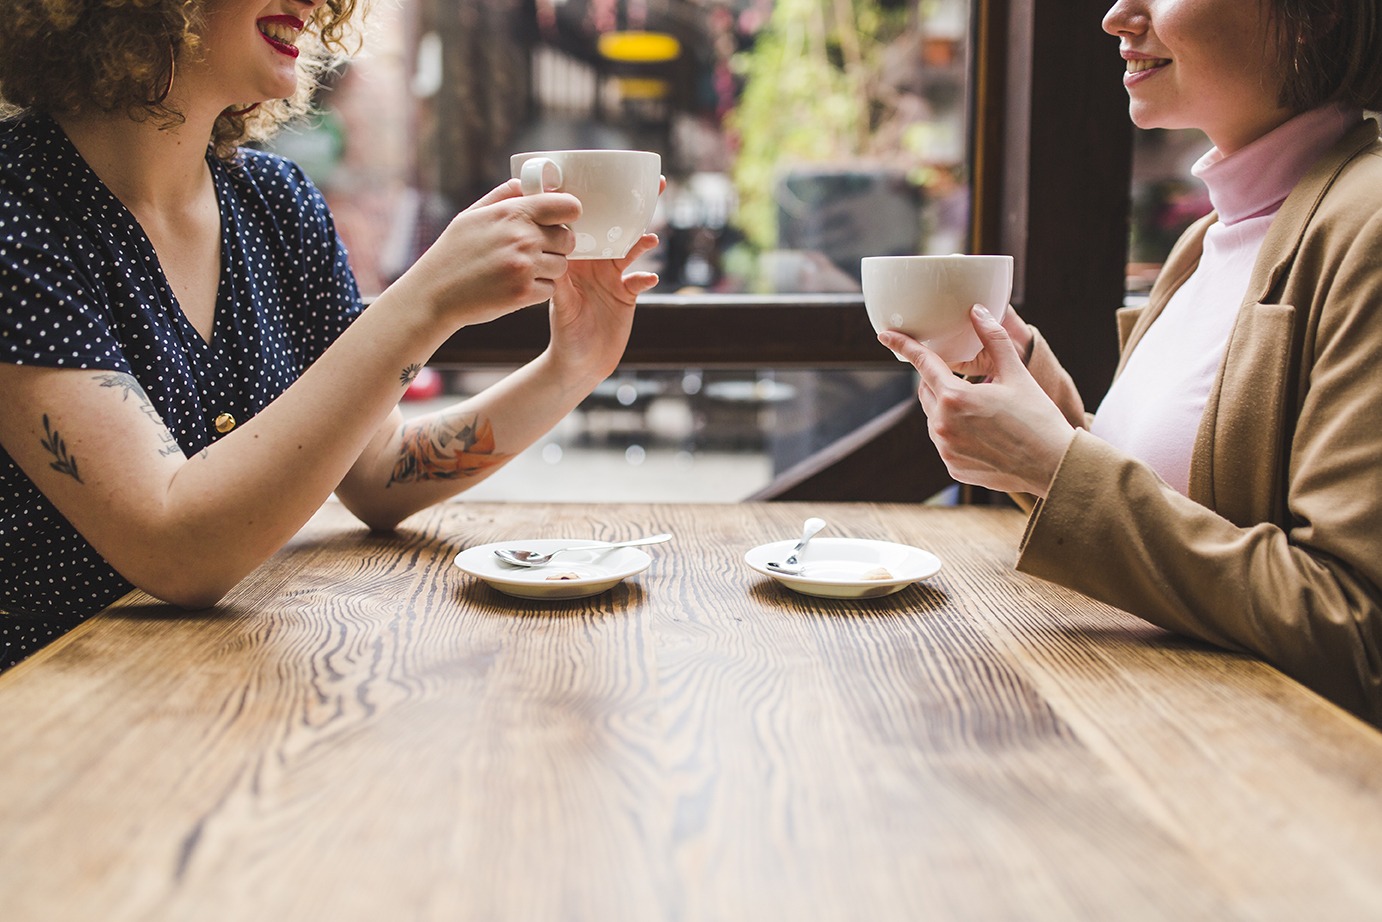 image of two women at cafe table drinking coffee smiling